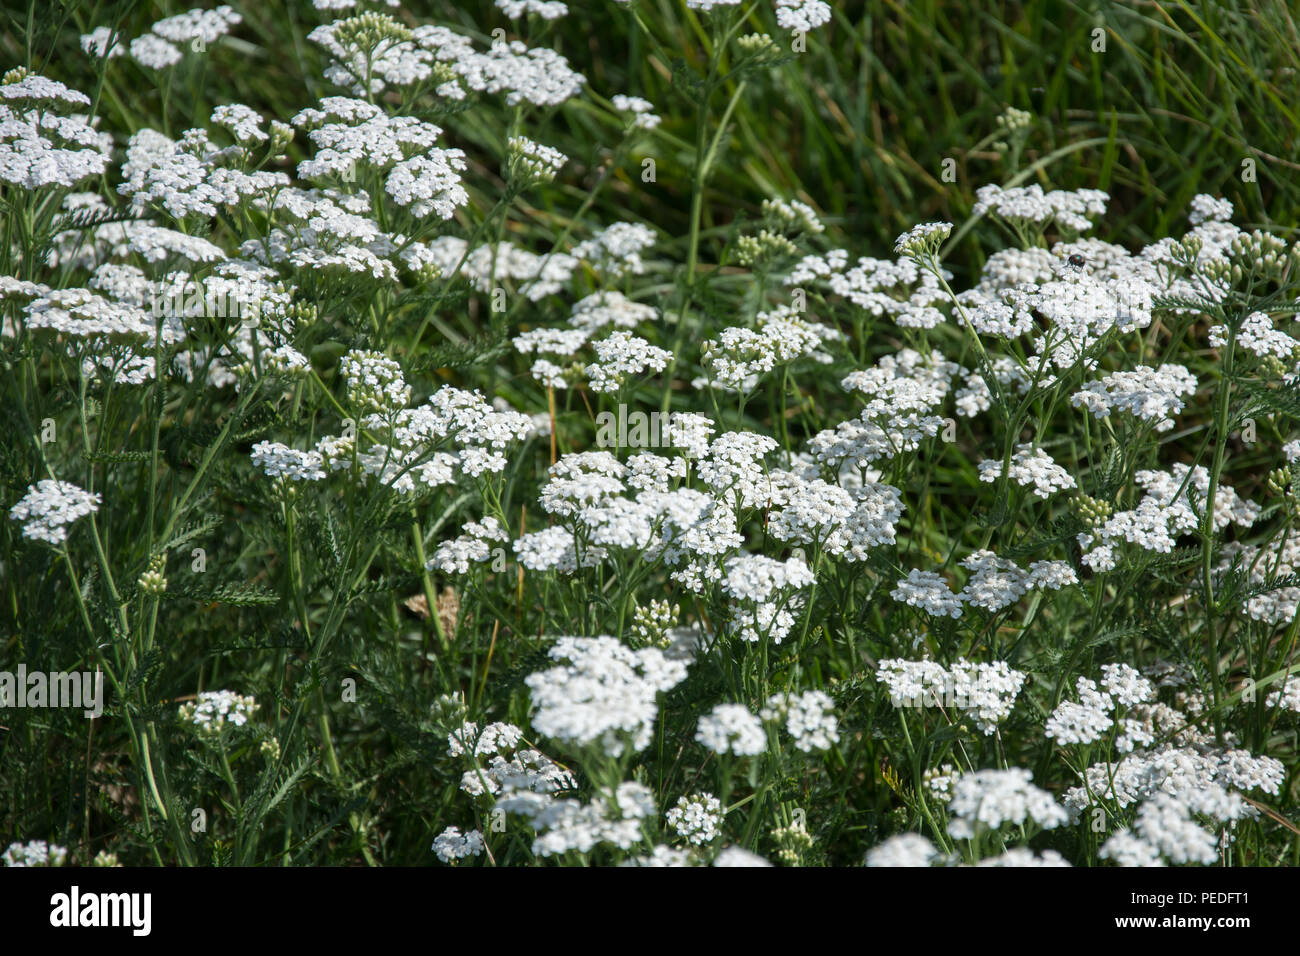 Big cluster of milfoil flowering plants on a green meadow Stock Photo